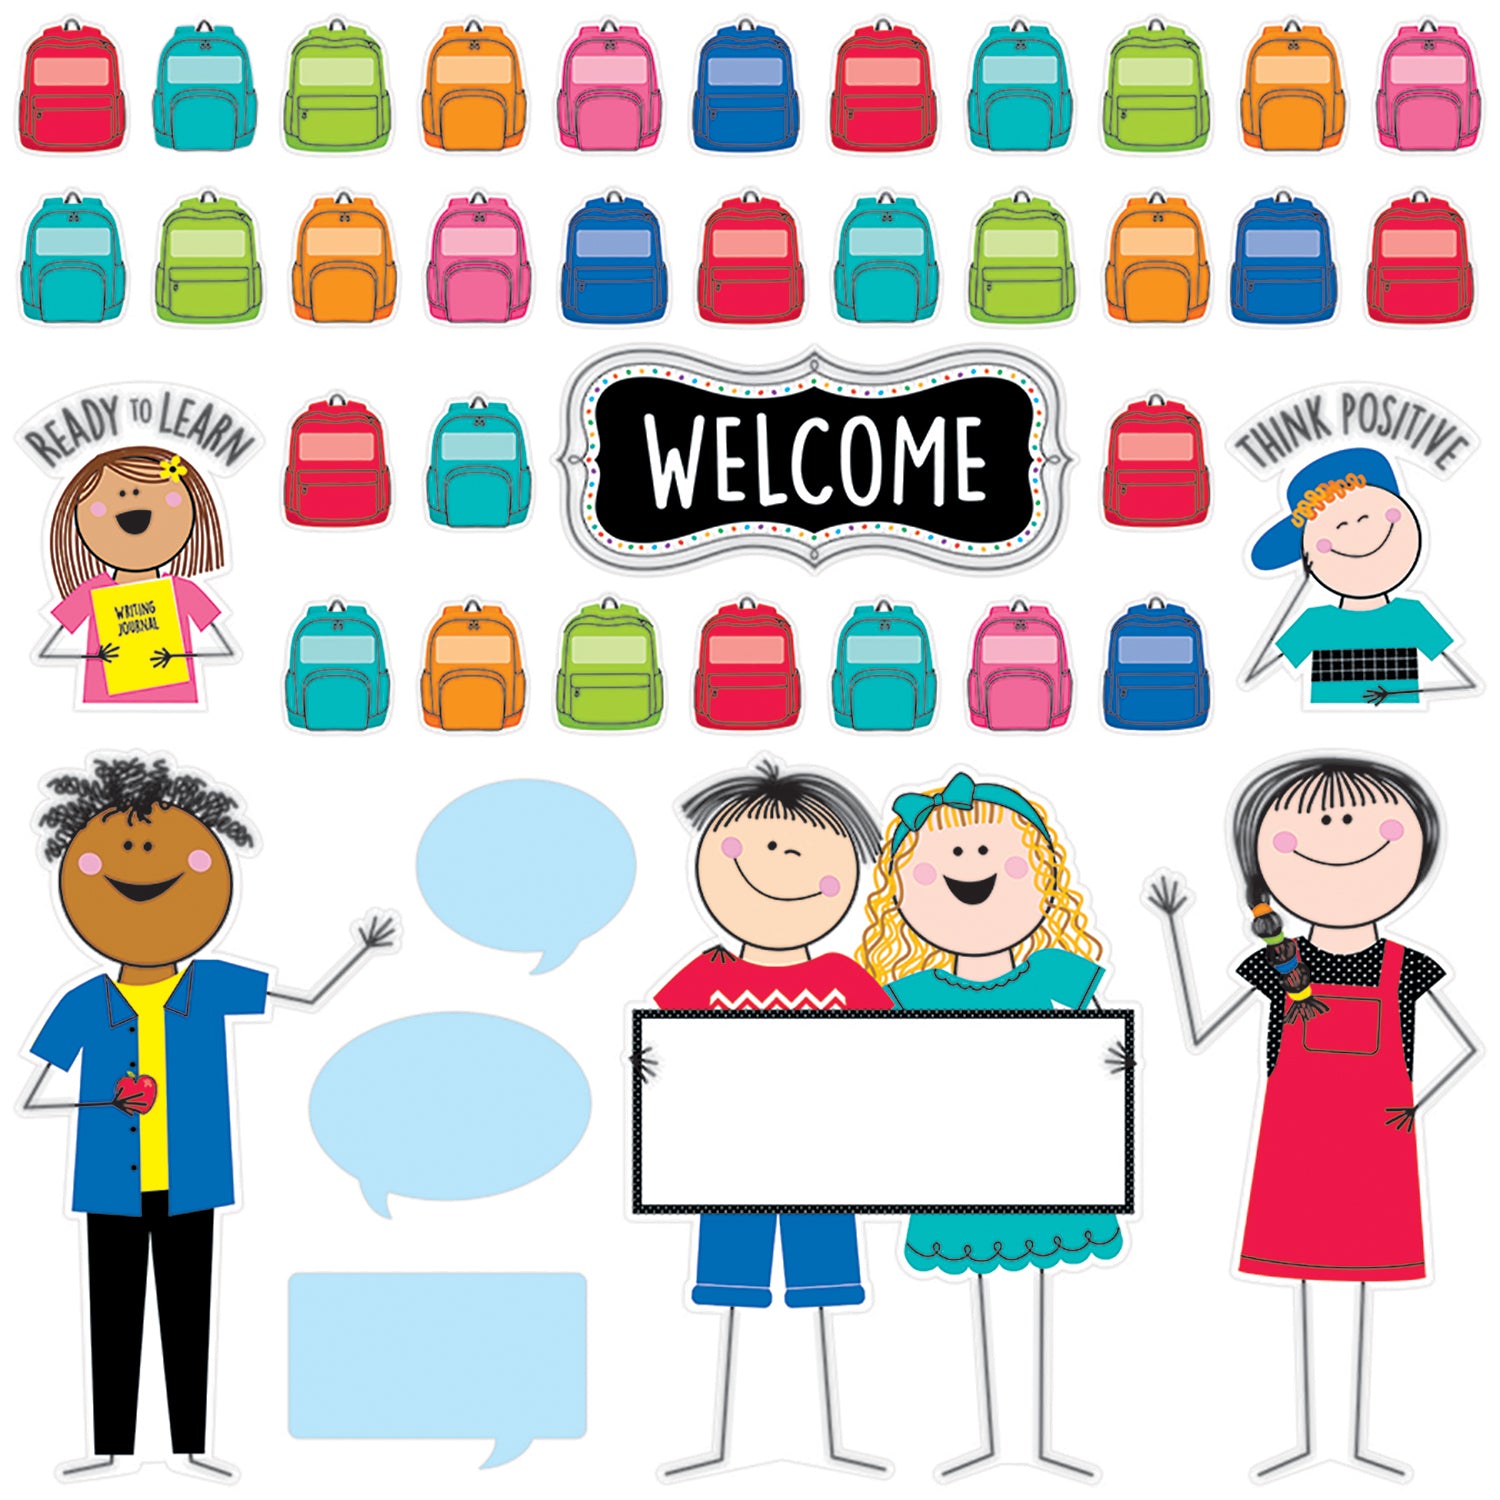 Stick Kids All Are Welcome Bulletin Board Set - A1 School Supplies